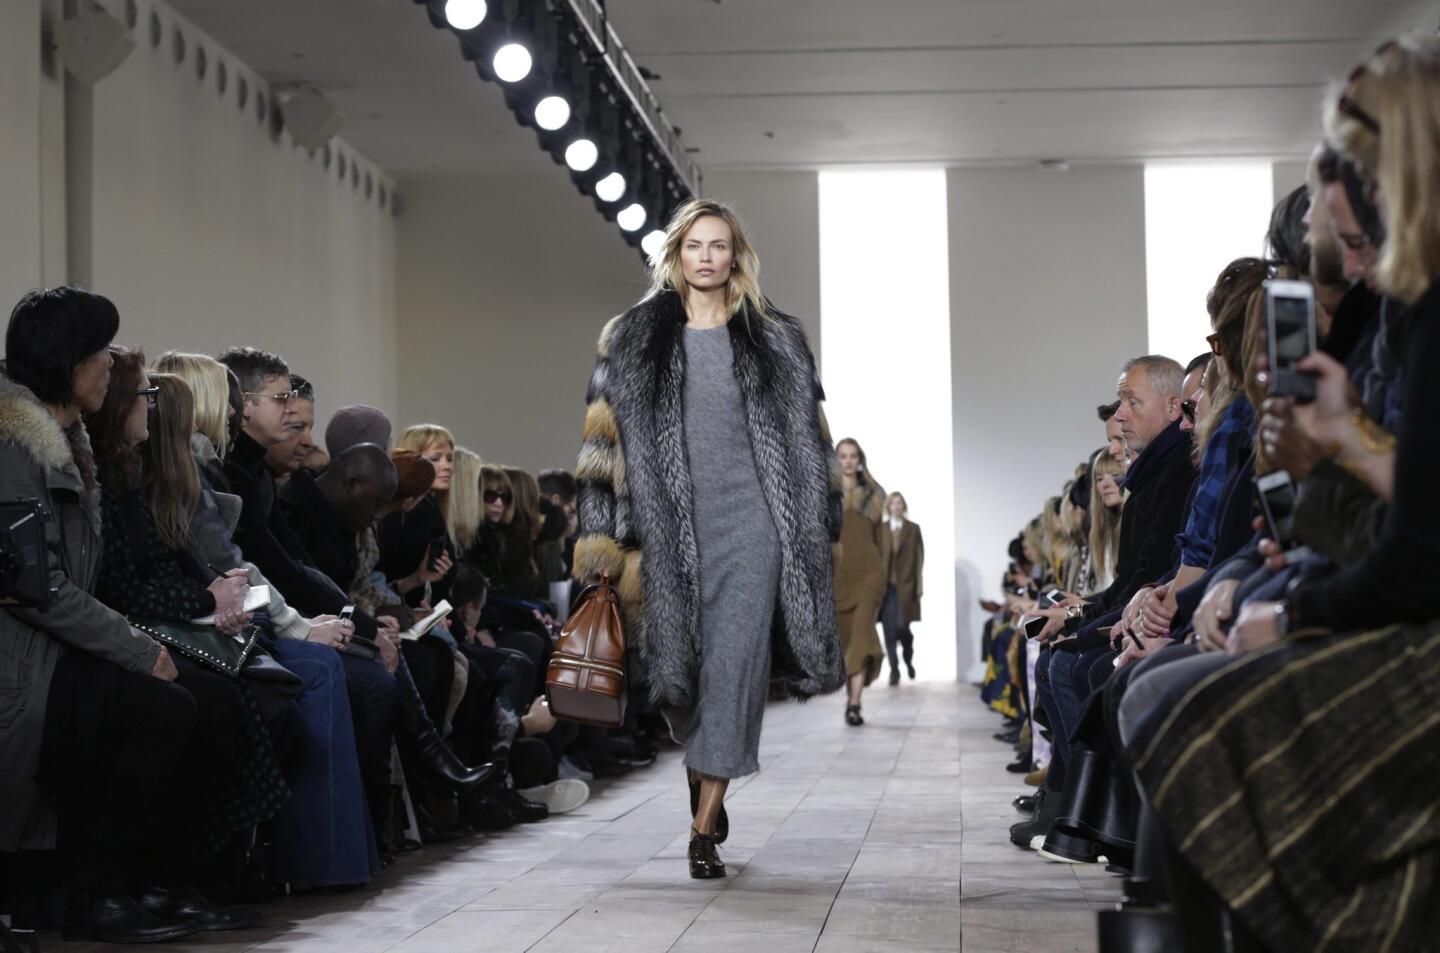 Model Natasha Poly presents a creation from the Fall 2015 collection by Michael Kors during the New York Fashion Week. Complete updates from New York Fashion Week 2015 | Celebrities at New York Fashion Week | New York Fashion Week: Street Style